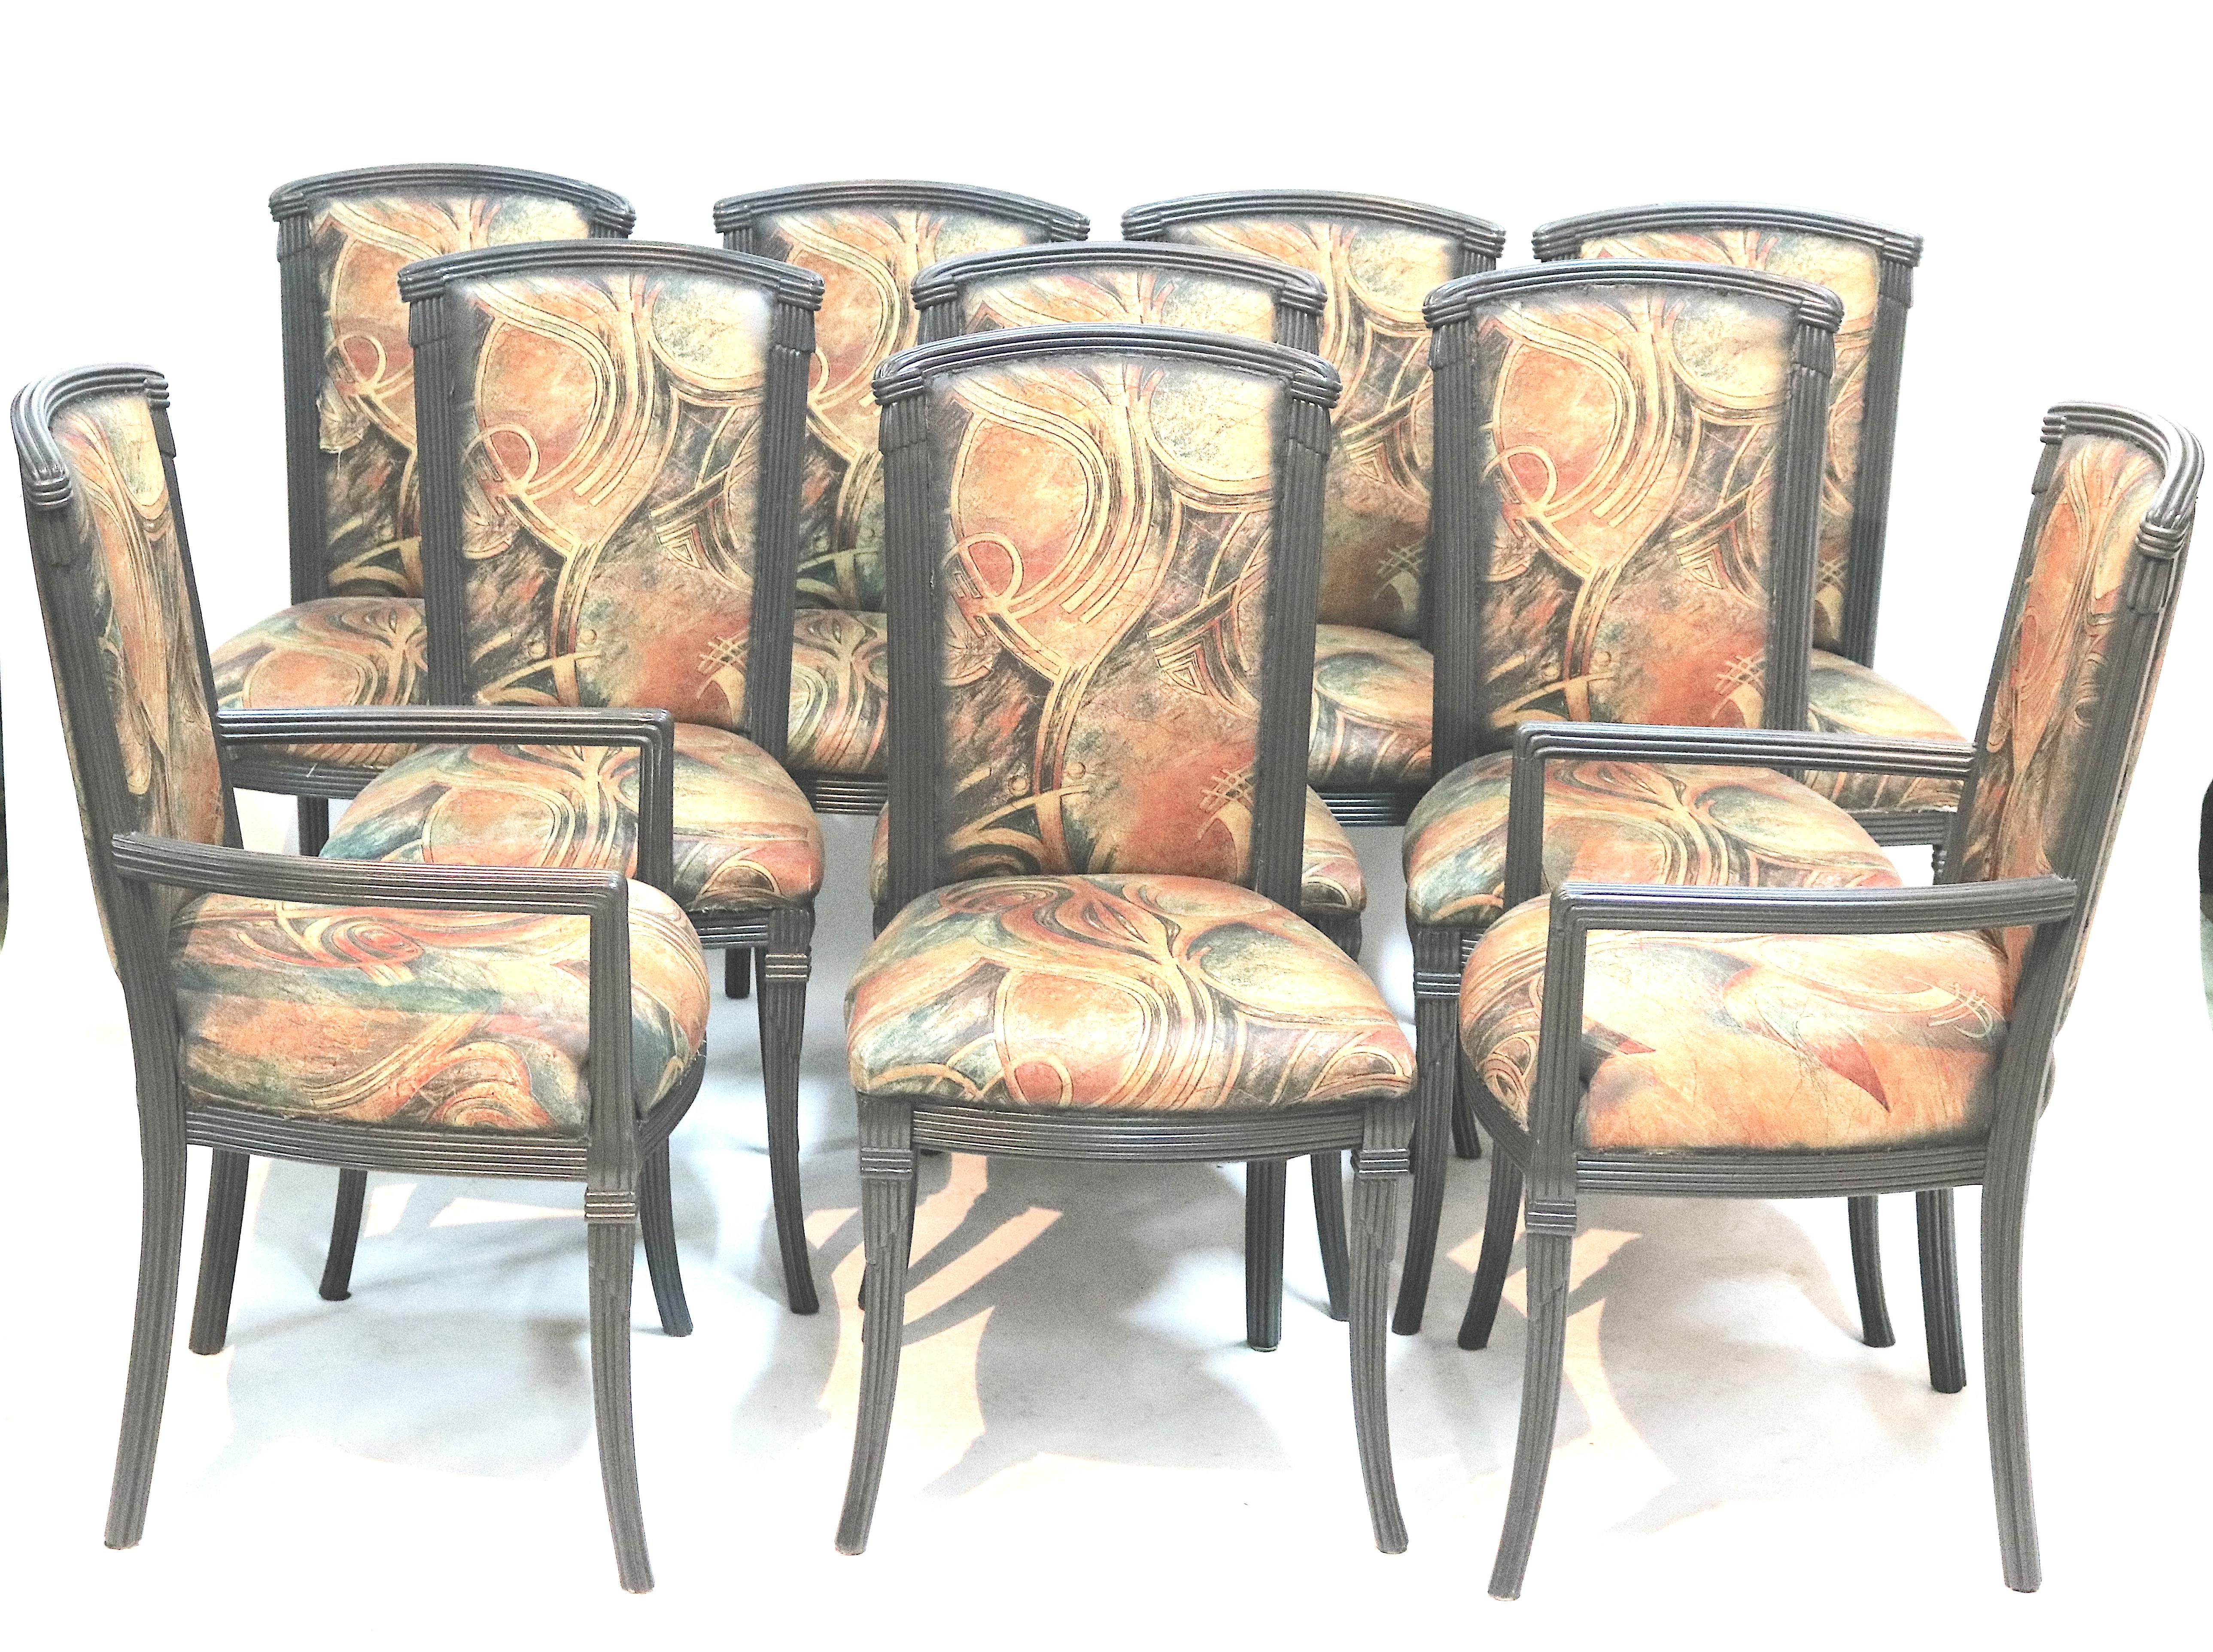 Nicely Detail Carved Frame Dining Chairs newly painted in charcoal gray satin lacquer.  Chairs will look gorgeous when re-upholstered.
Elegant Interior Crafts set of 10 dining chairs, Mid-Century Modern dine in style with eight armless and two